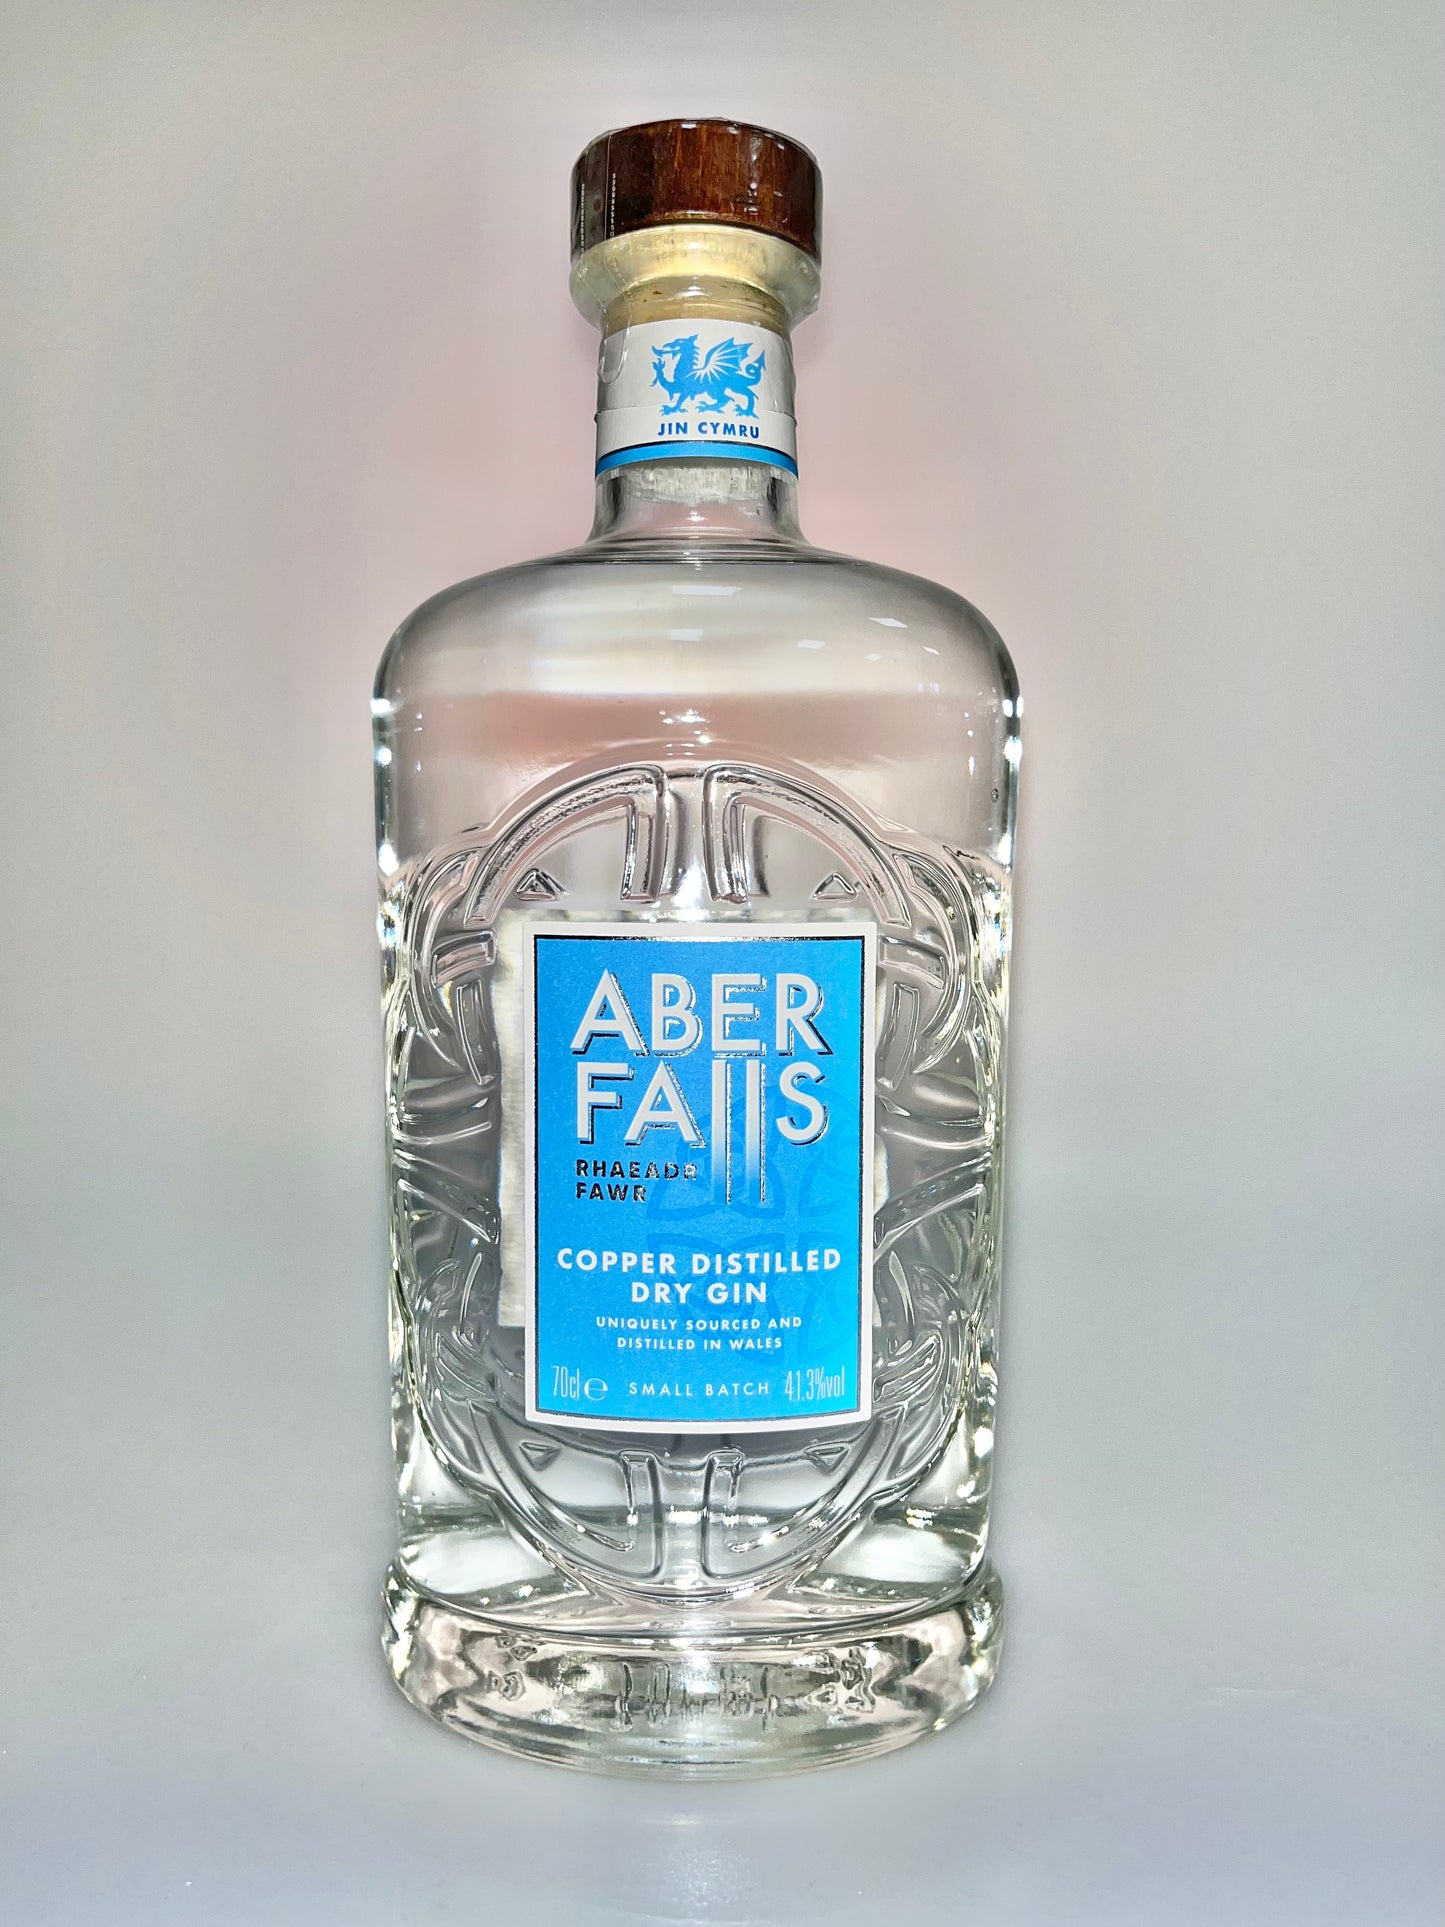 Aber Falls Welsh Dry Gin (2022 Release)